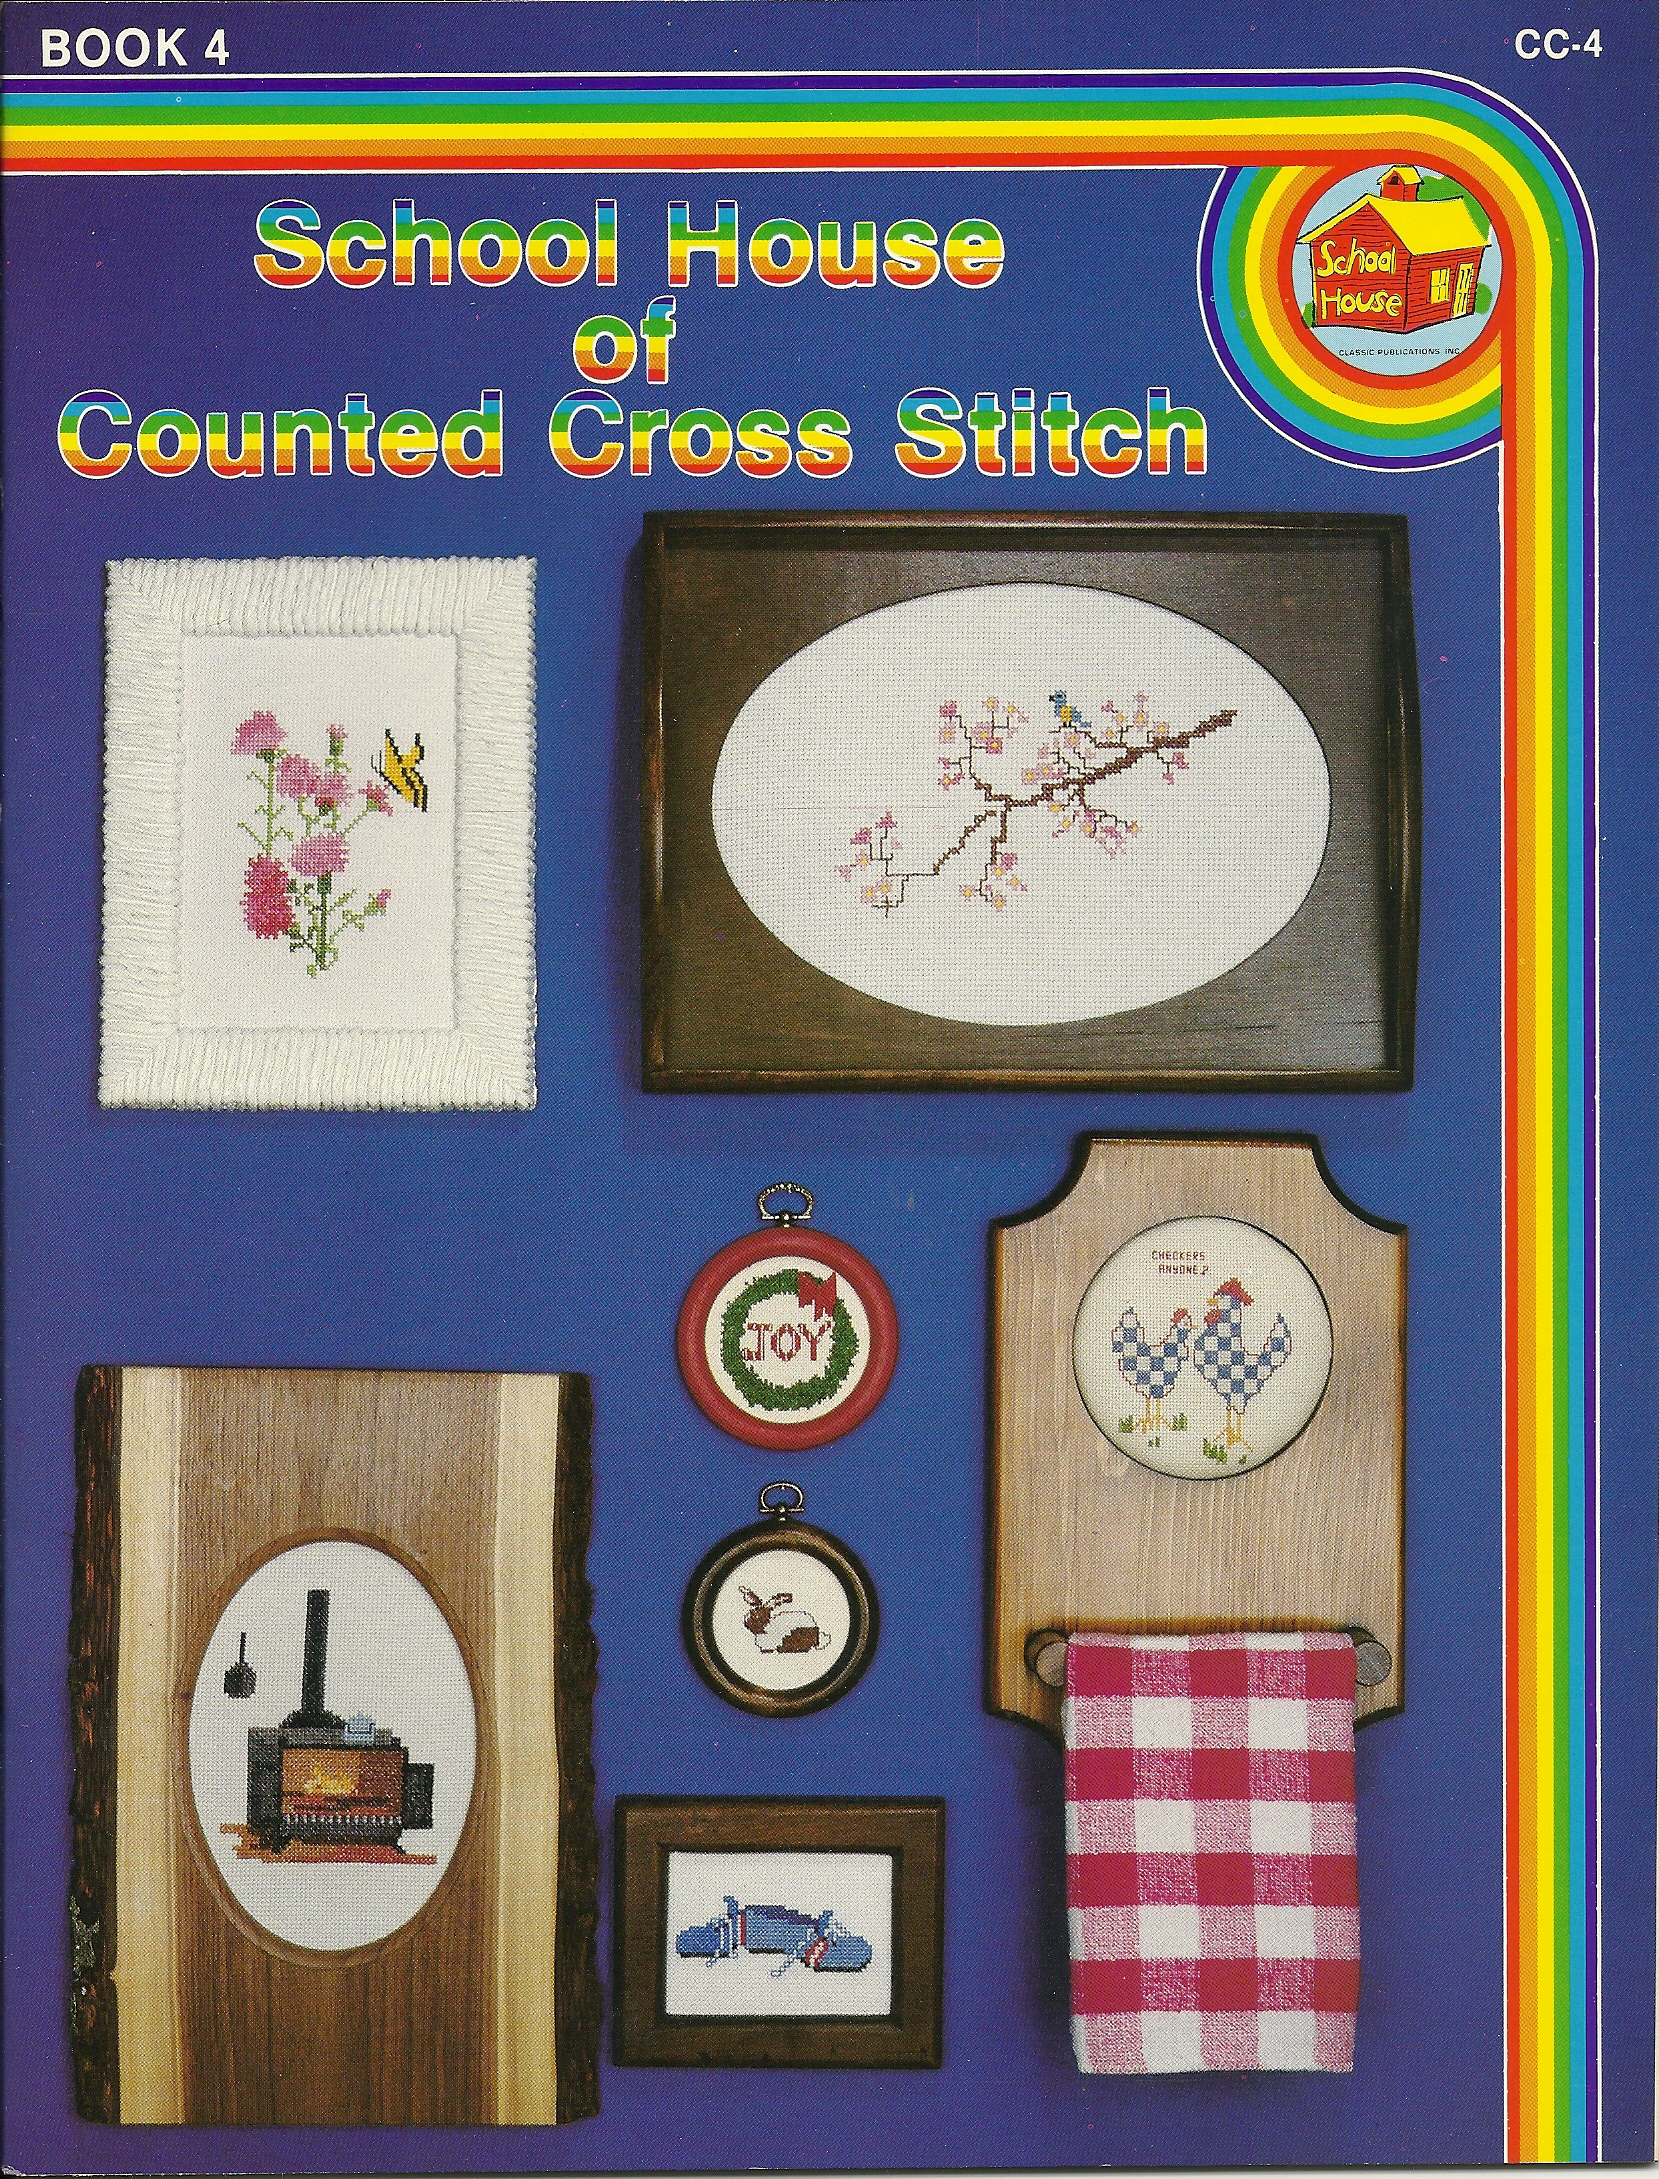 School House of Counted Cross Stitch  Book 4